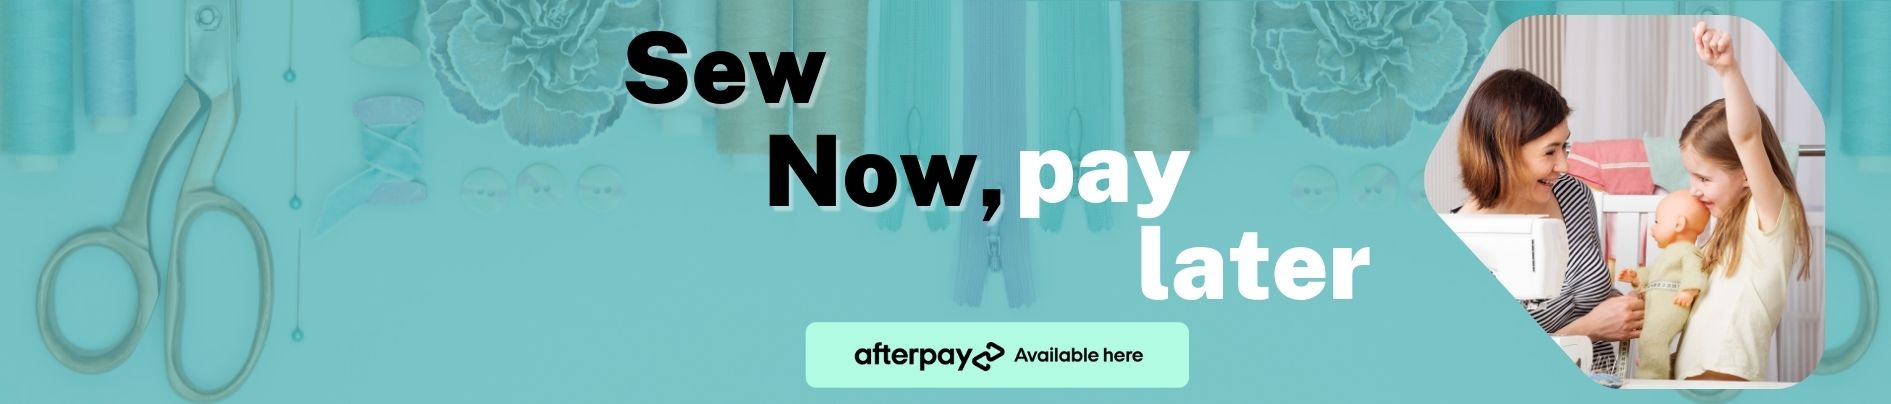 Sew Now Pay Later with Afterpay Banner v2